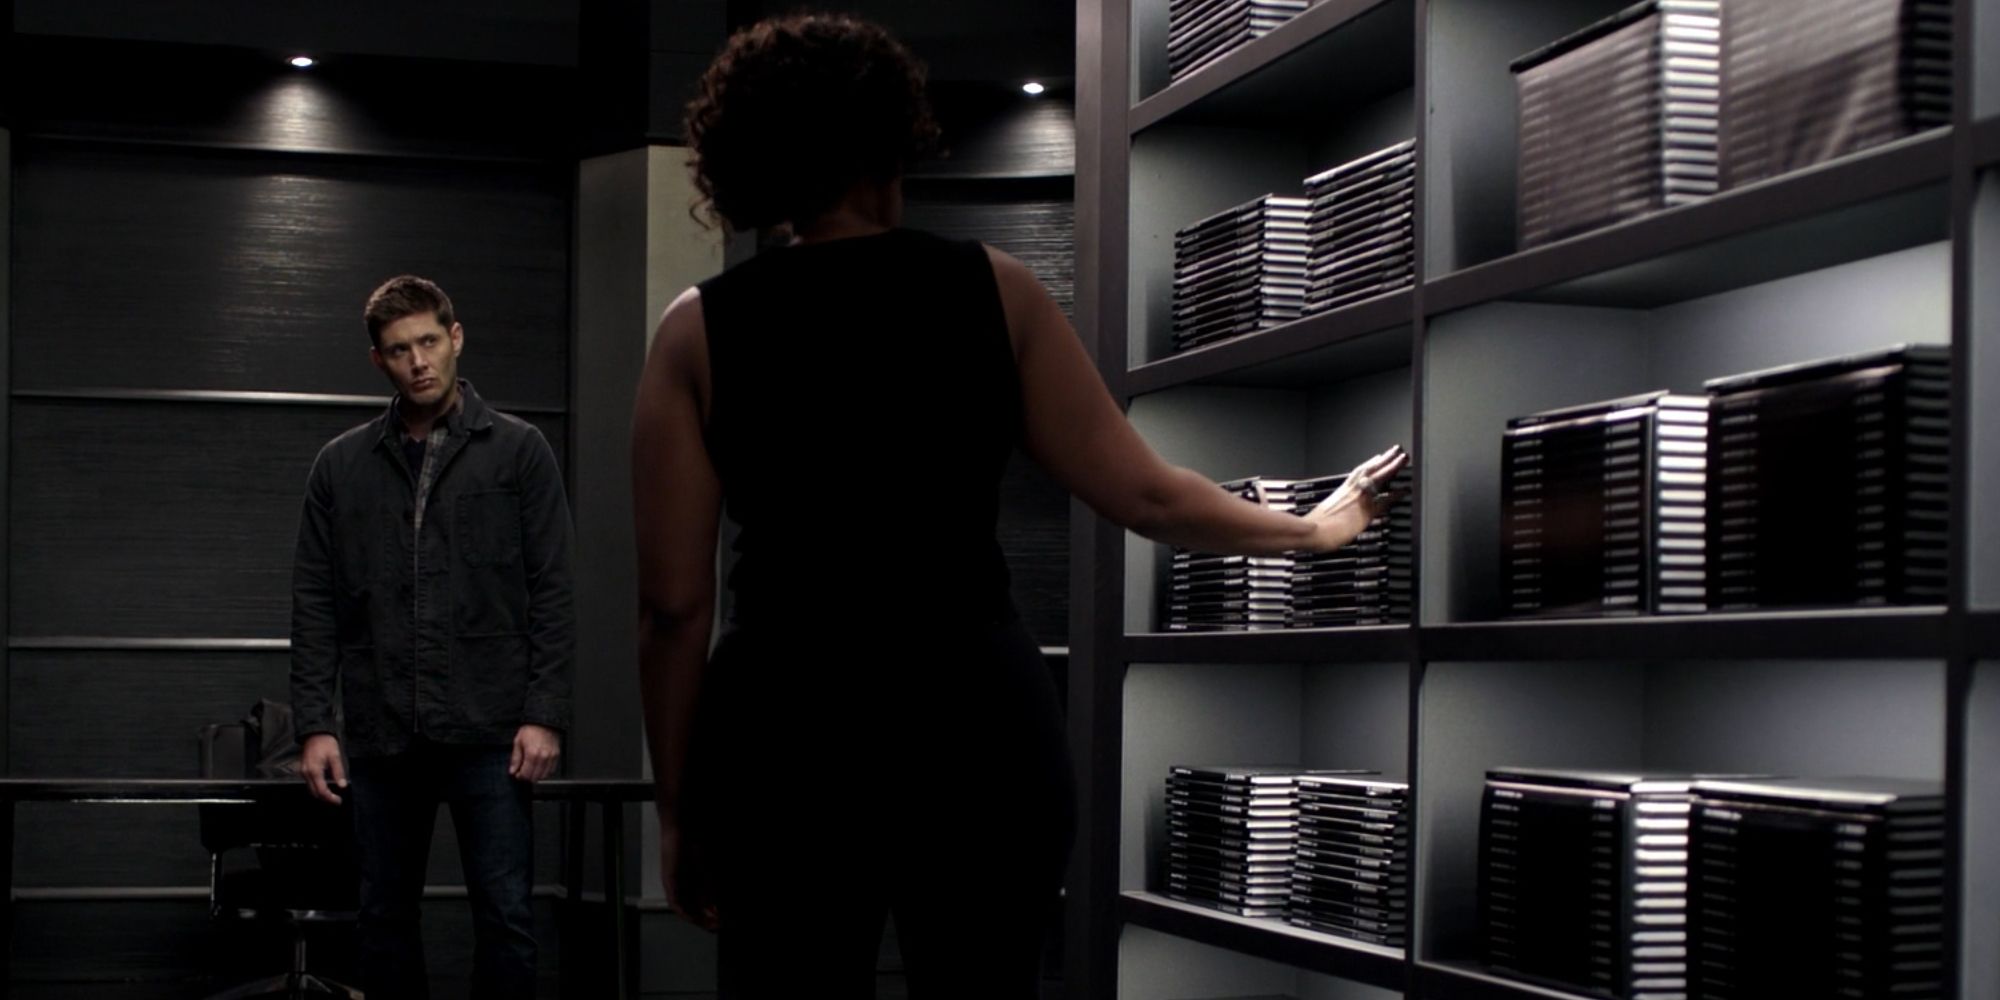 Dean standing in front of Billie (Death) and a shelf full of books.